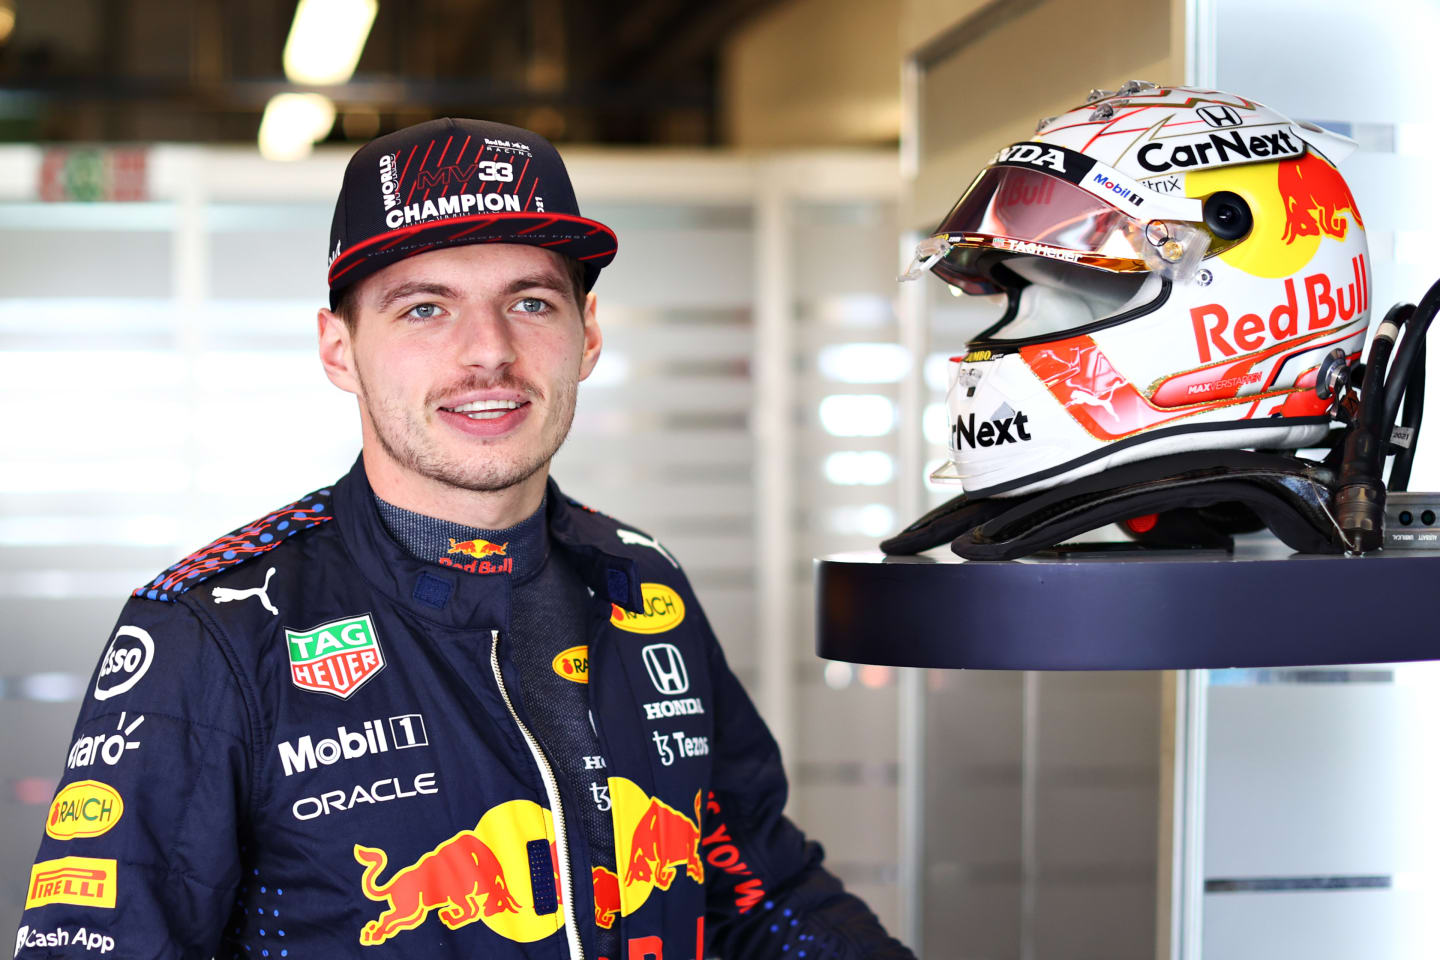 ABU DHABI, UNITED ARAB EMIRATES - DECEMBER 14: Max Verstappen of Netherlands and Red Bull Racing